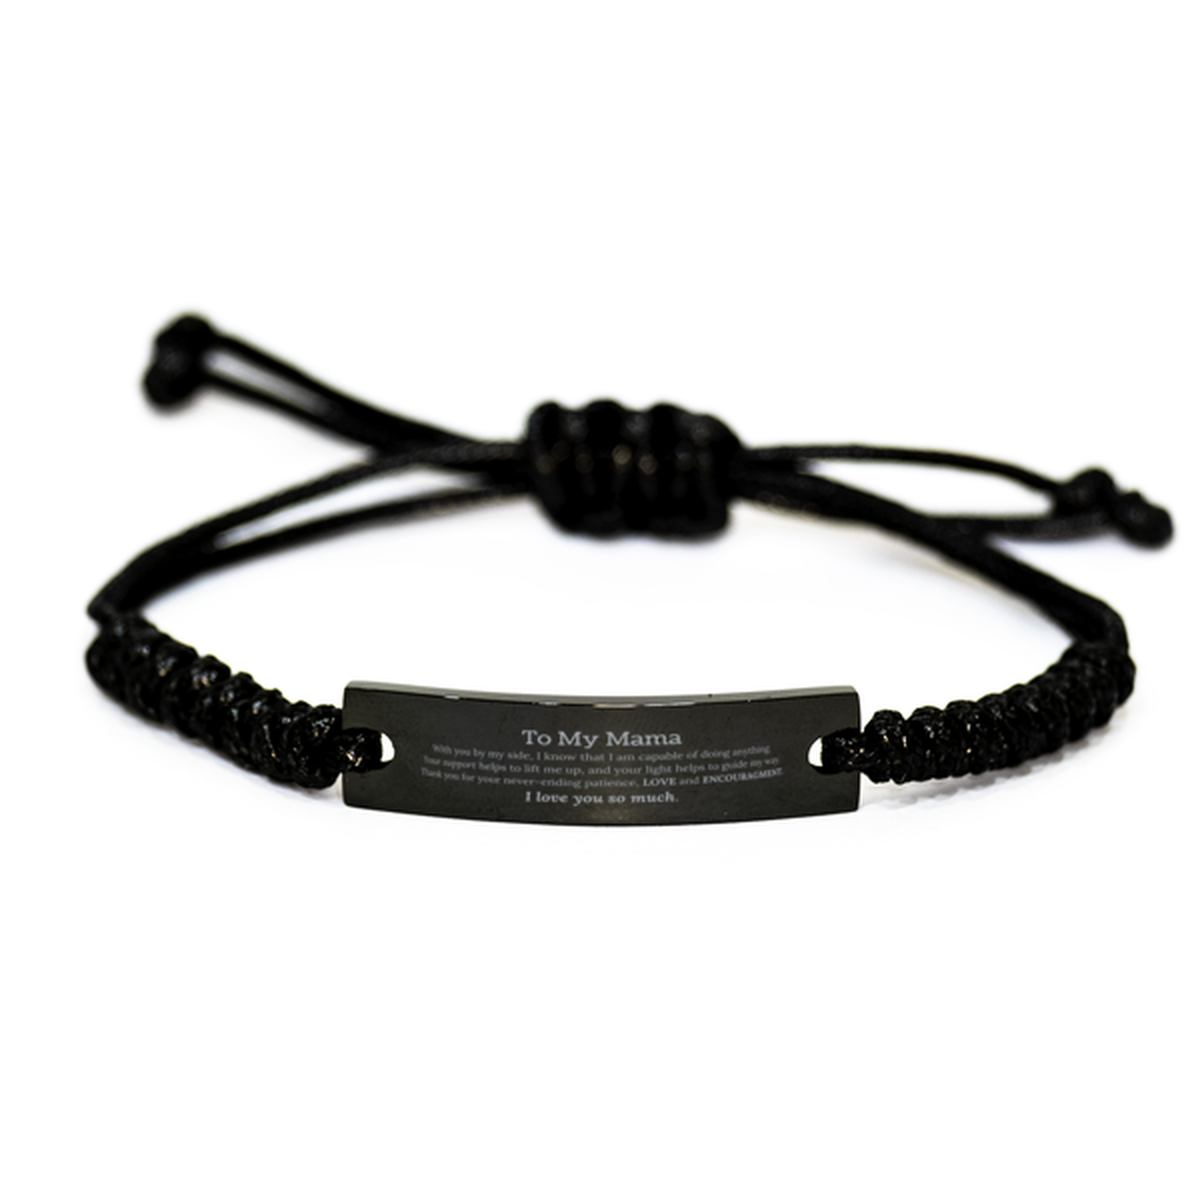 Appreciation Mama Black Rope Bracelet Gifts, To My Mama Birthday Christmas Wedding Keepsake Gifts for Mama With you by my side, I know that I am capable of doing anything. I love you so much